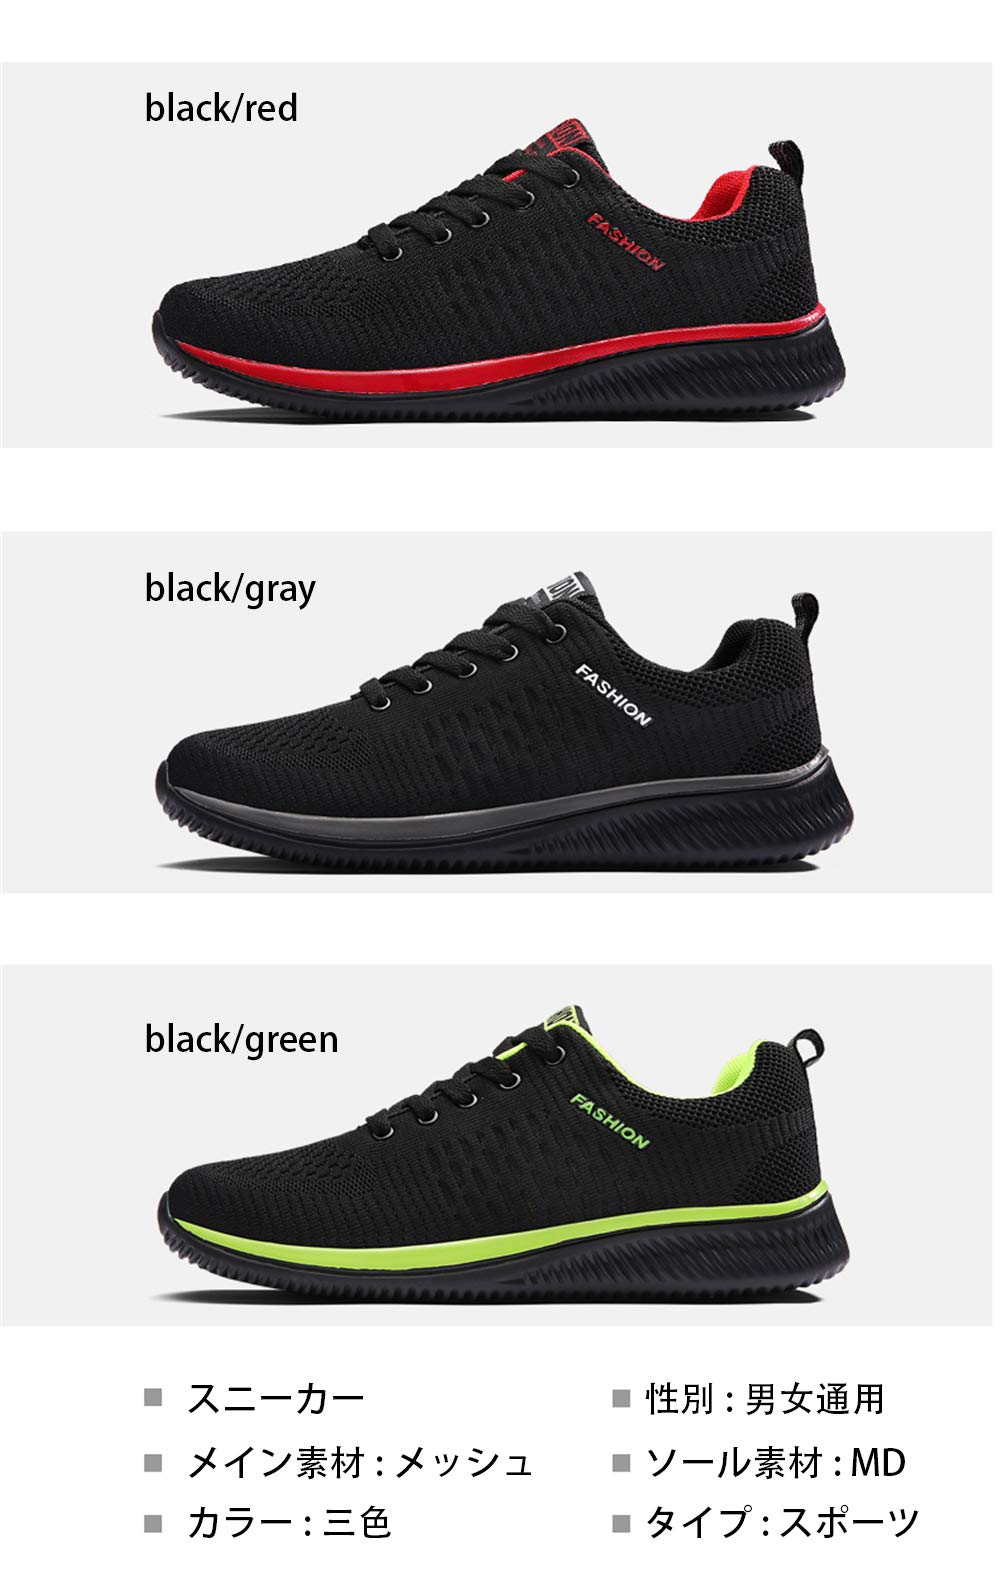 FITKYJP Lightweight Sneakers, Sports Shoes, Running, Athletic, Gym, Training, Casual, Men's, Women's, Non-Slip, Cushioned, Breathable, 7 Colors, Black